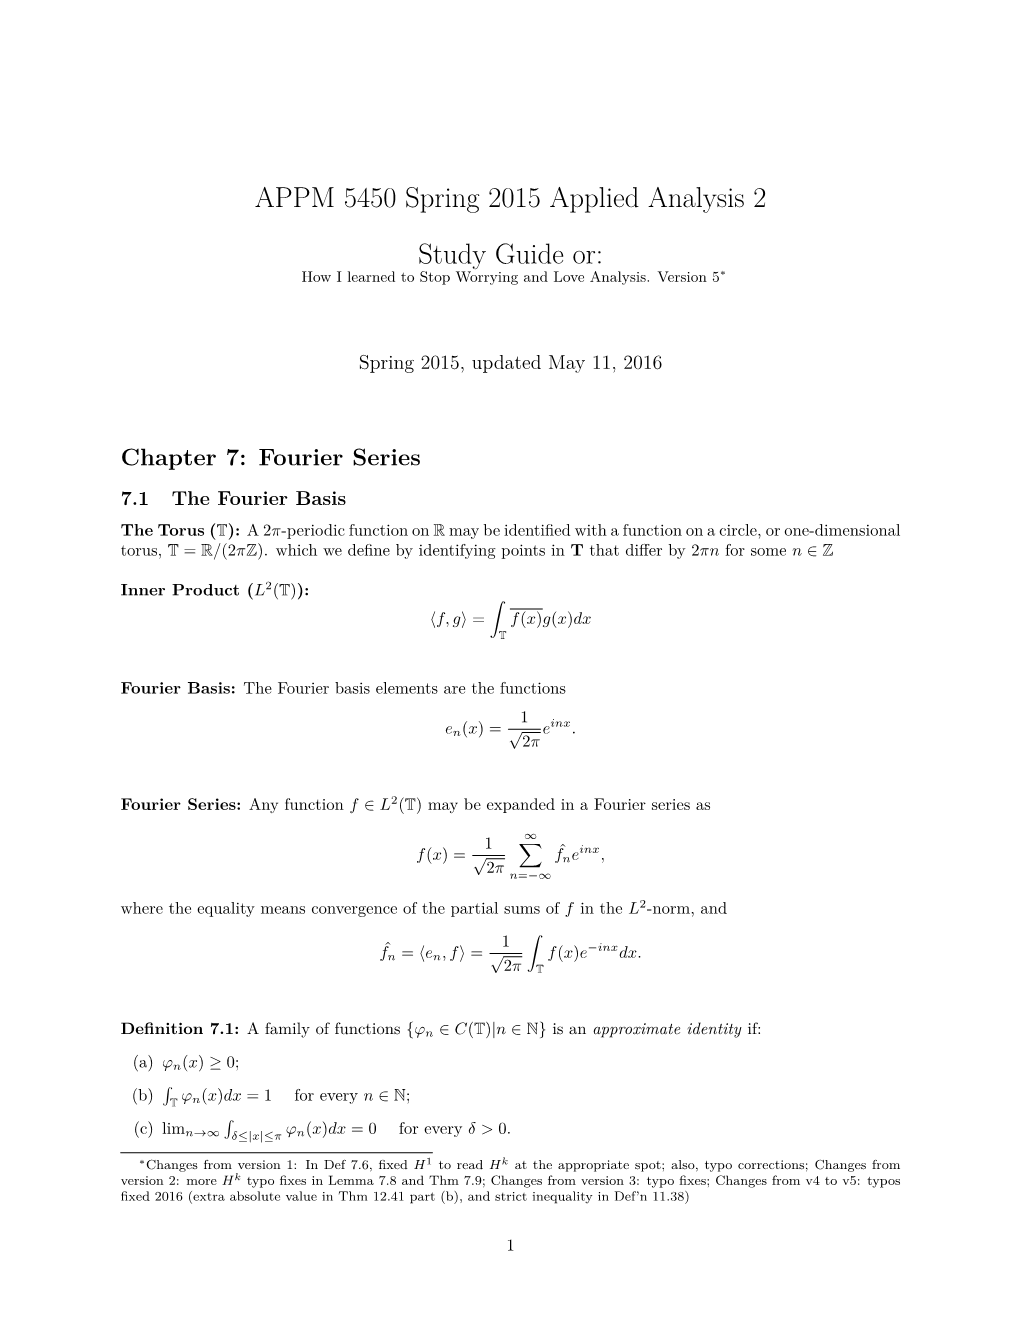 APPM 5450 Spring 2015 Applied Analysis 2 Study Guide Or: How I Learned to Stop Worrying and Love Analysis